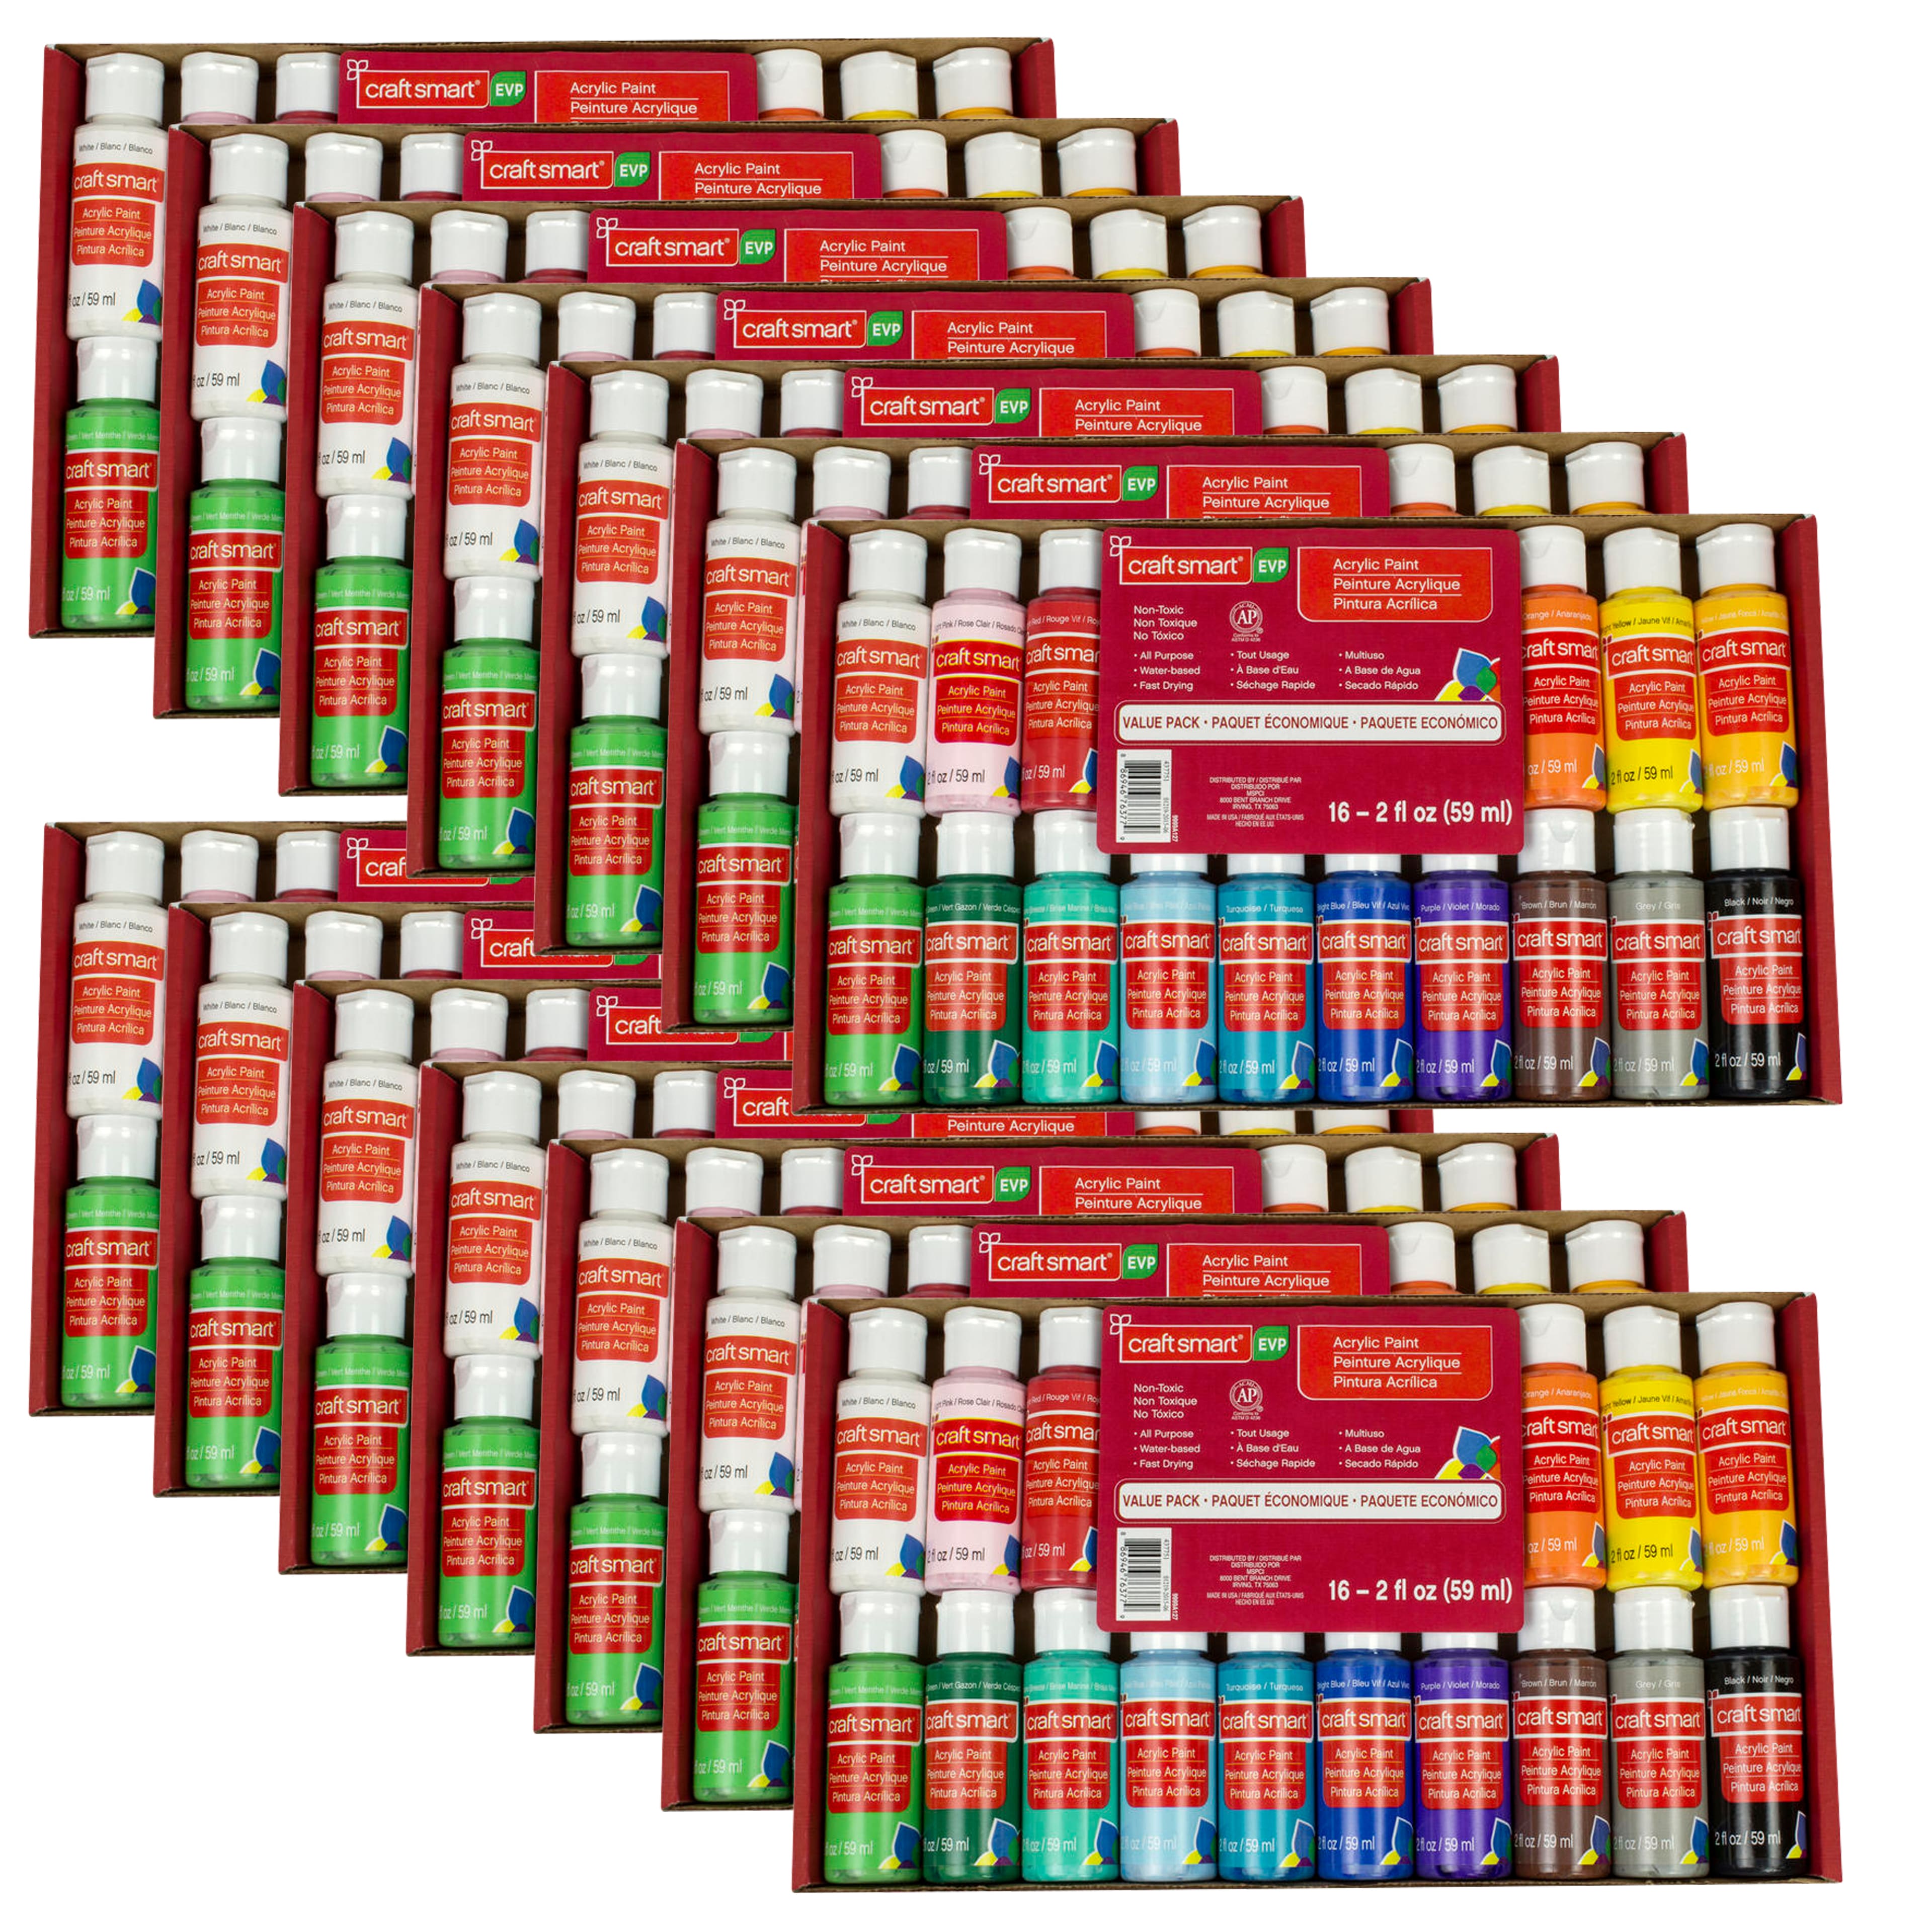 6 Packs: 24 ct. (144 total) Acrylic Paint Set by Craft Smart®